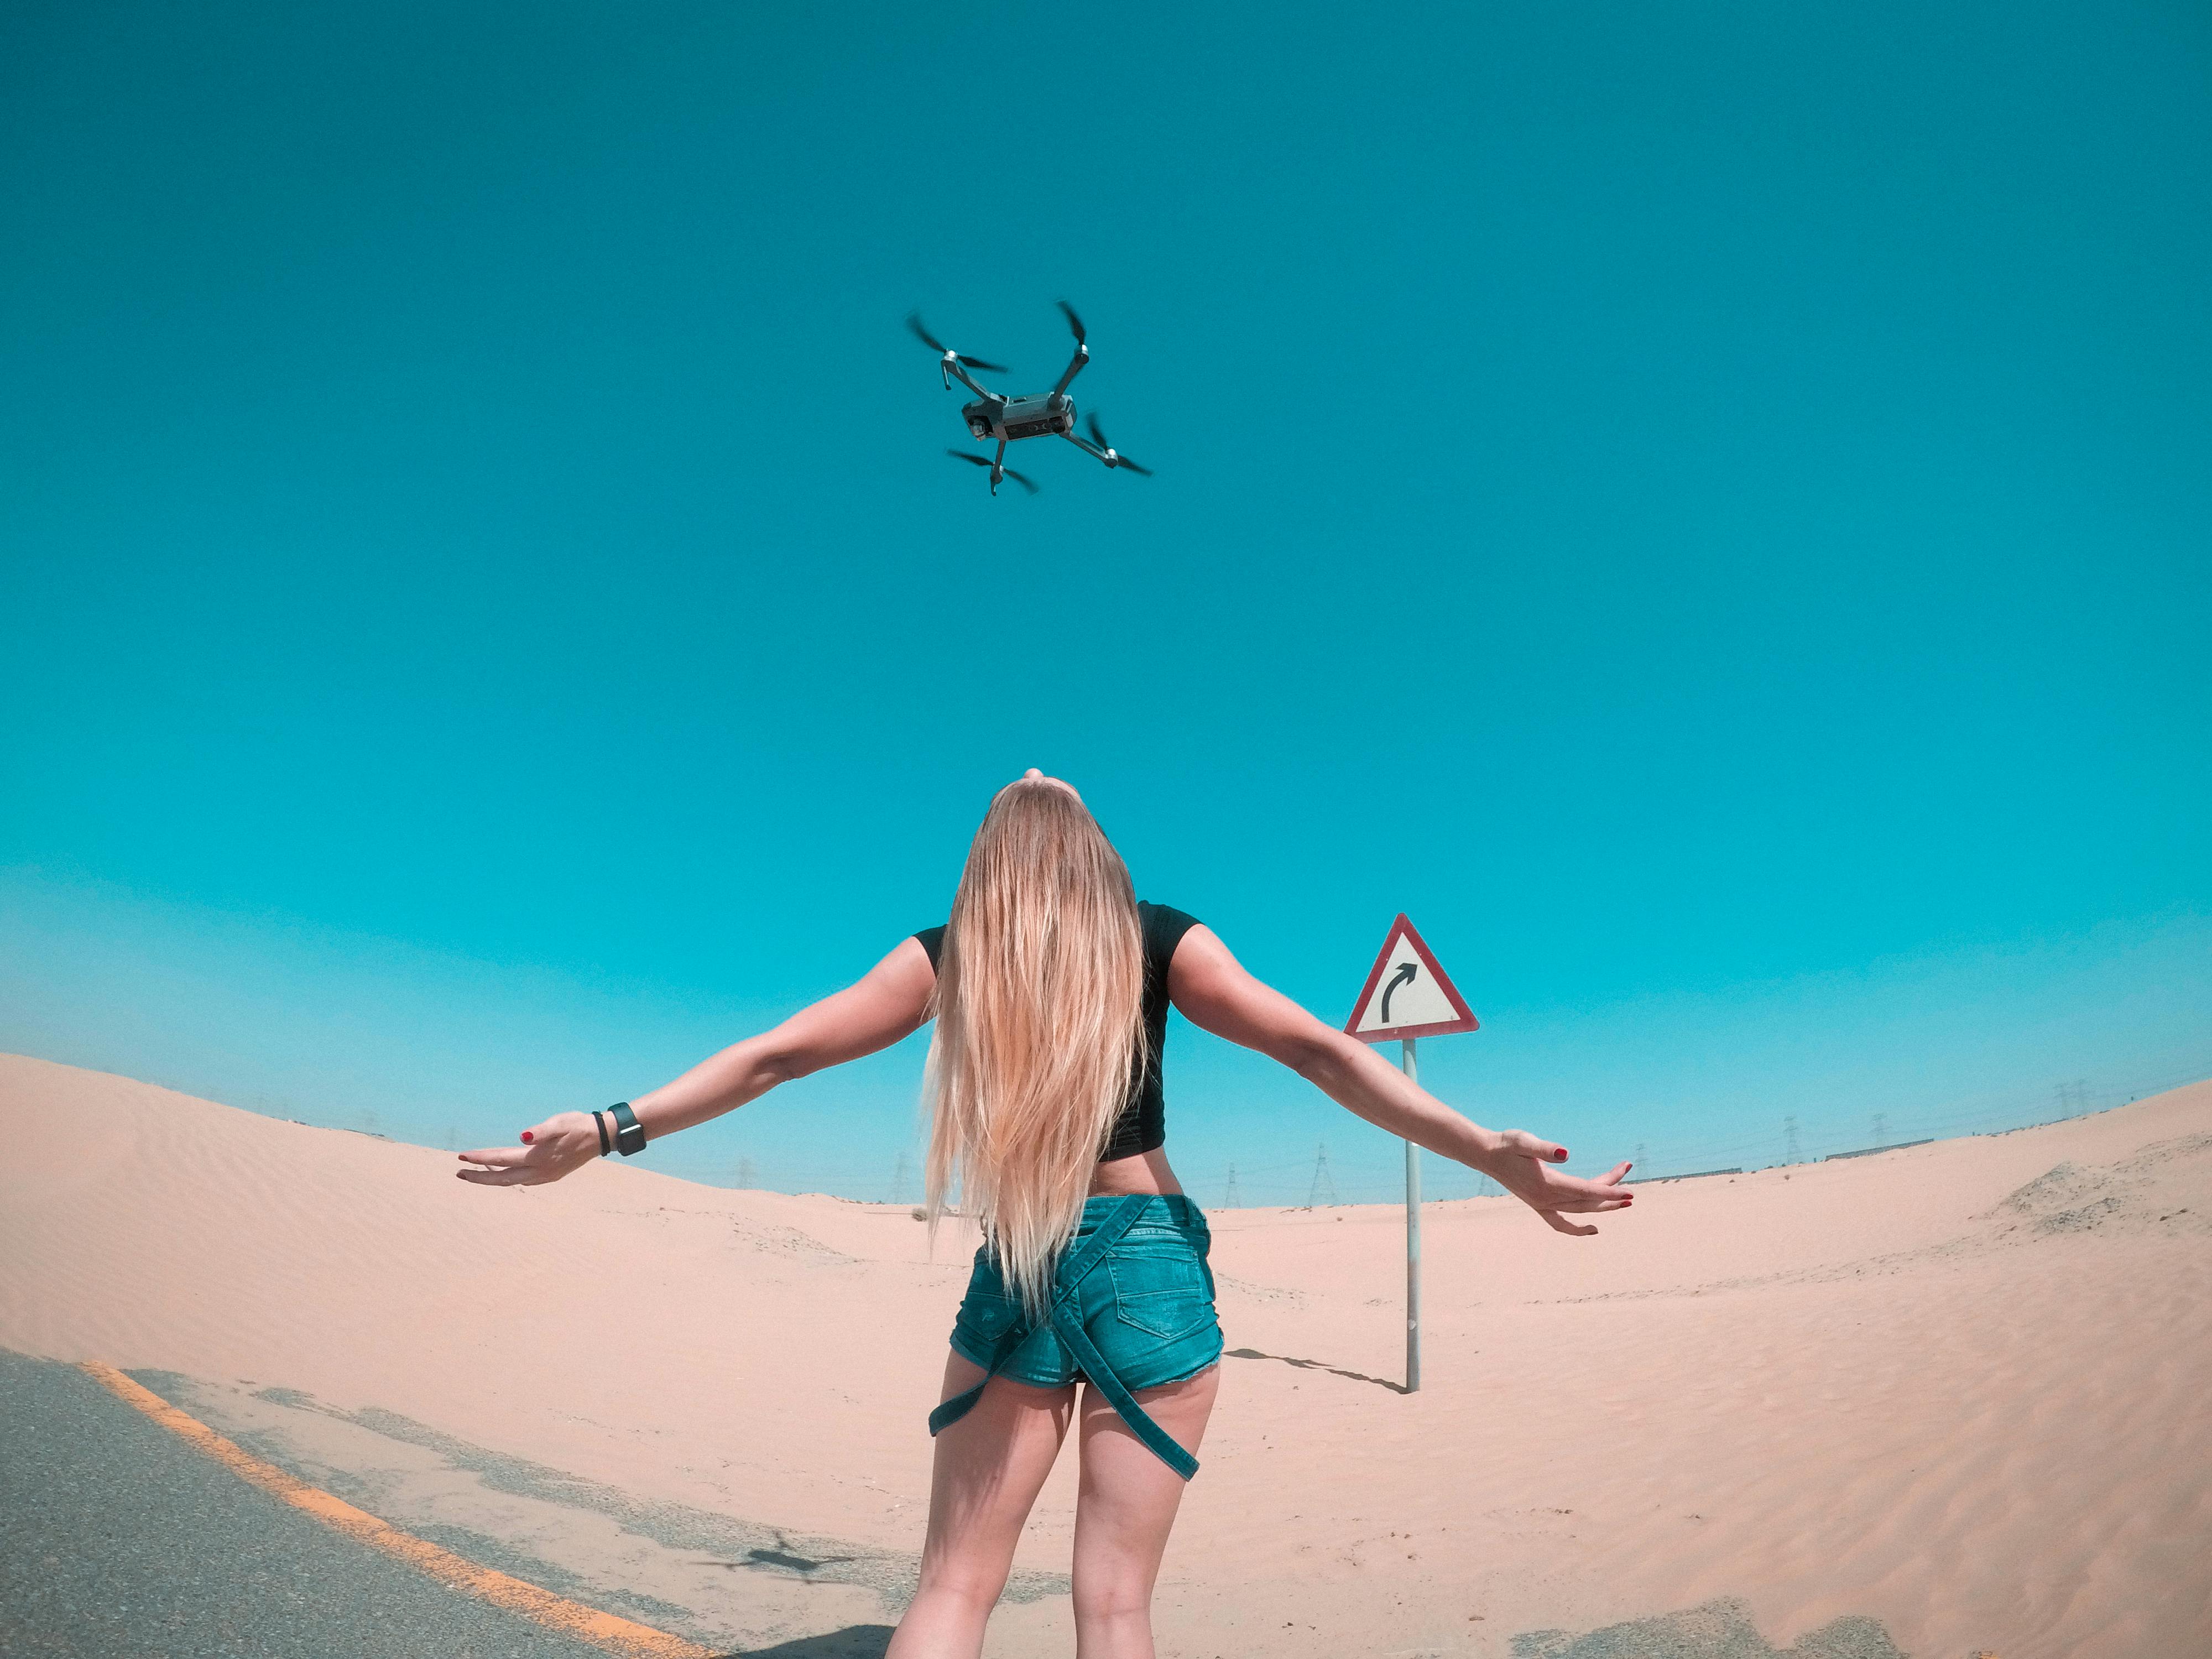 black quadcopter over woman wearing black shirt